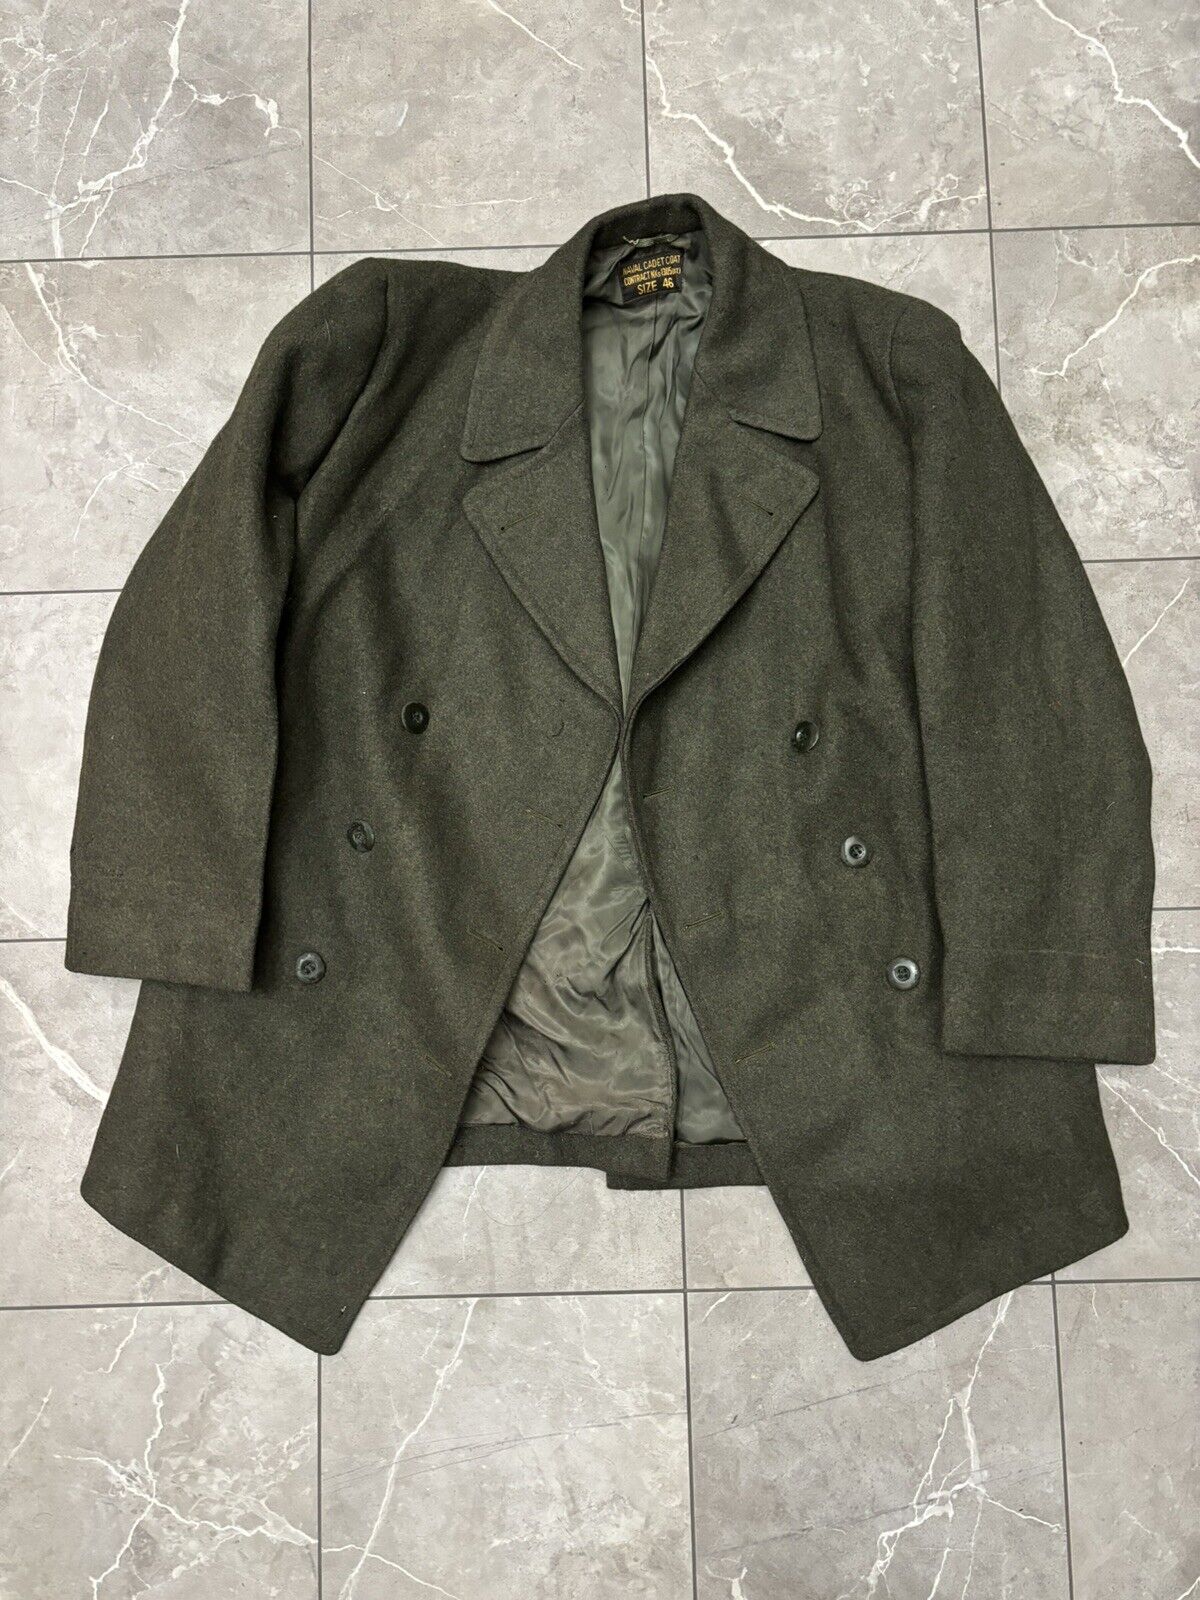 VTG WWII 1940’s Green Wool Naval Cadet Coat Size 46 US Navy’s Contract NXs-13105